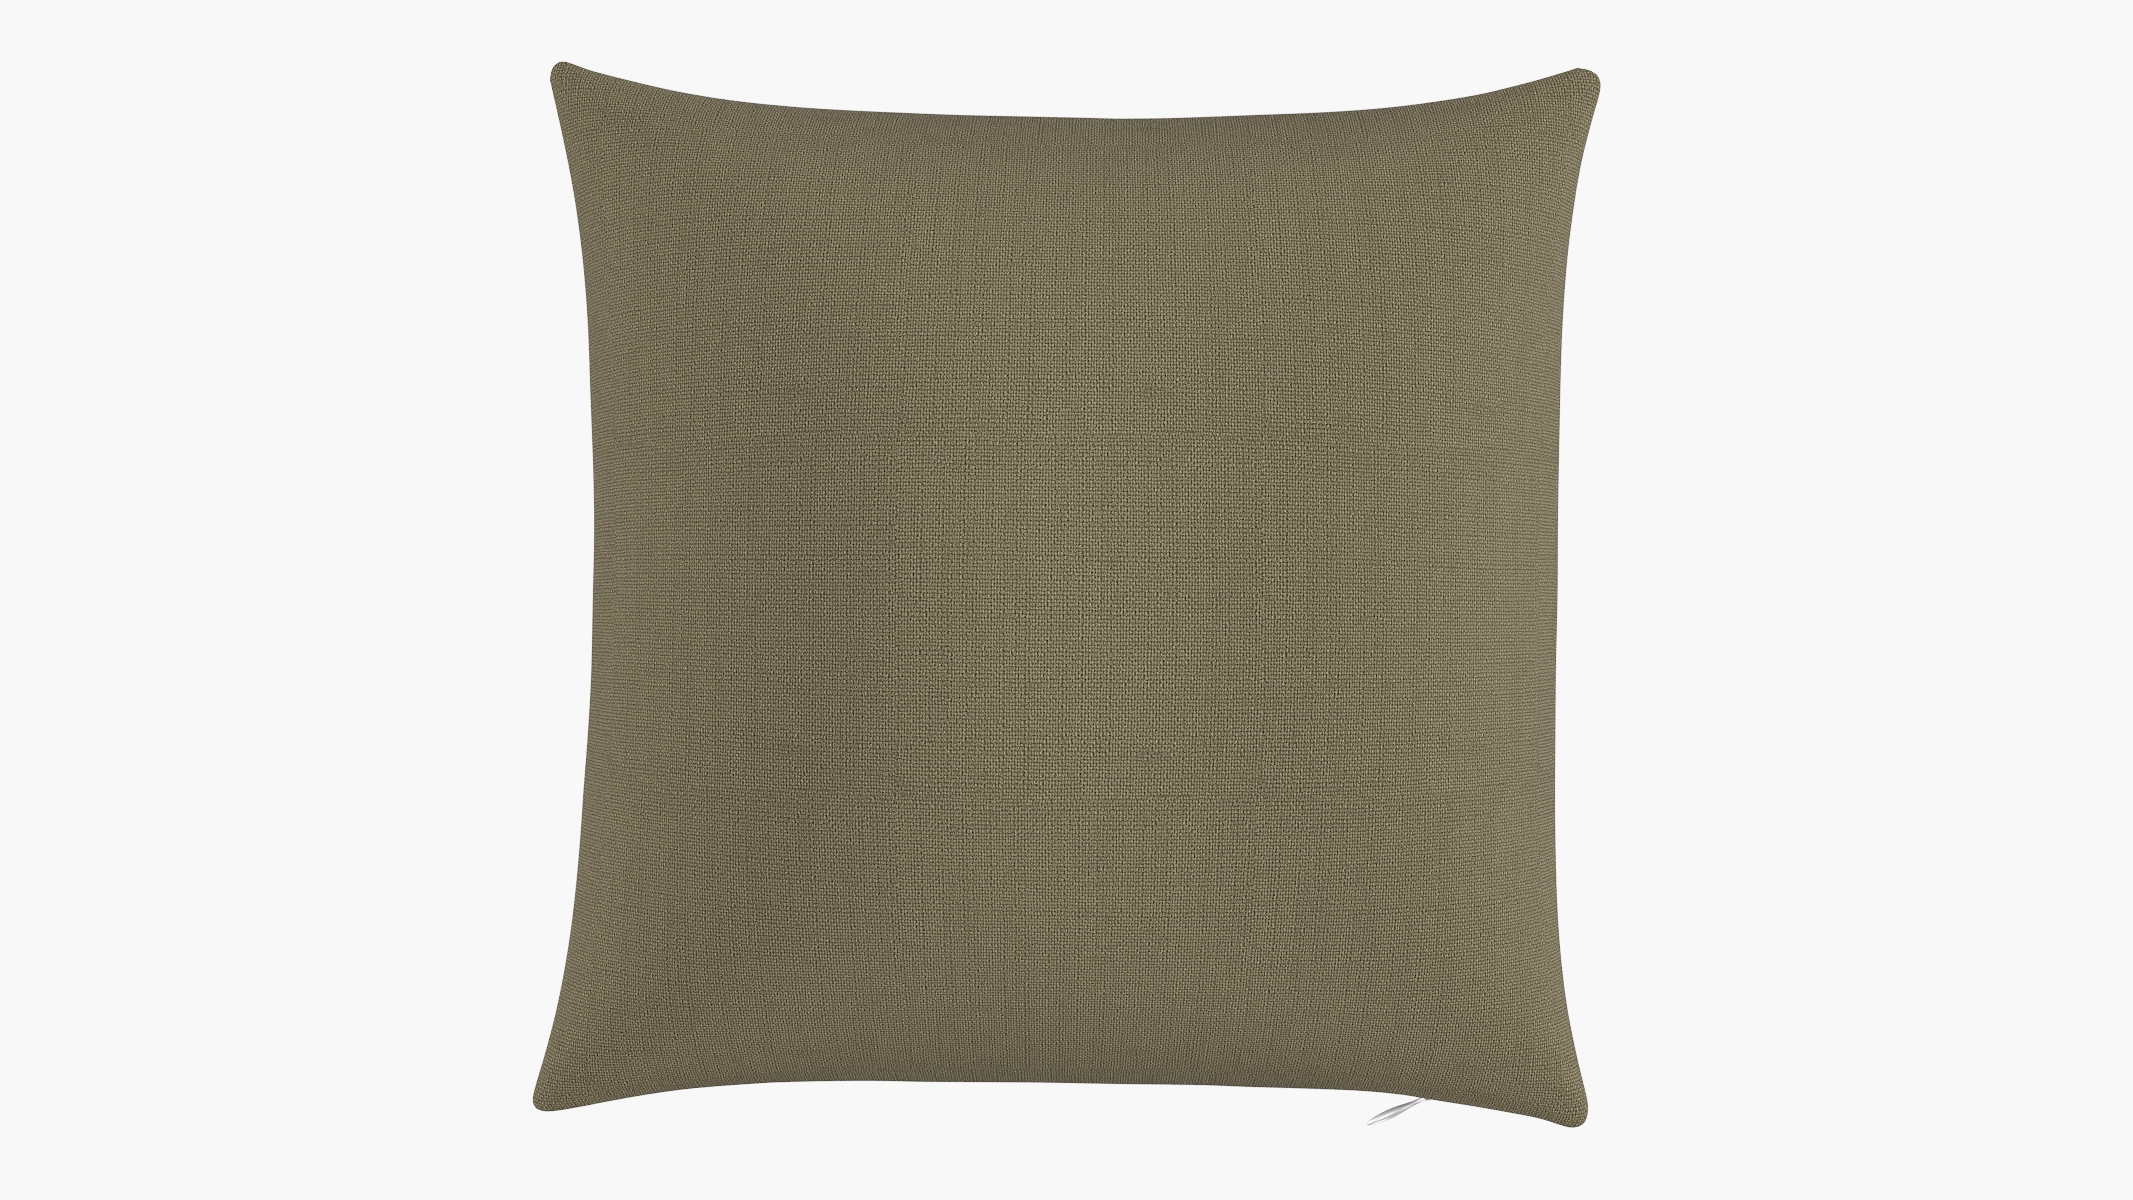 Throw Pillow 18", Olive Everyday Linen, 18" x 18" - Image 0